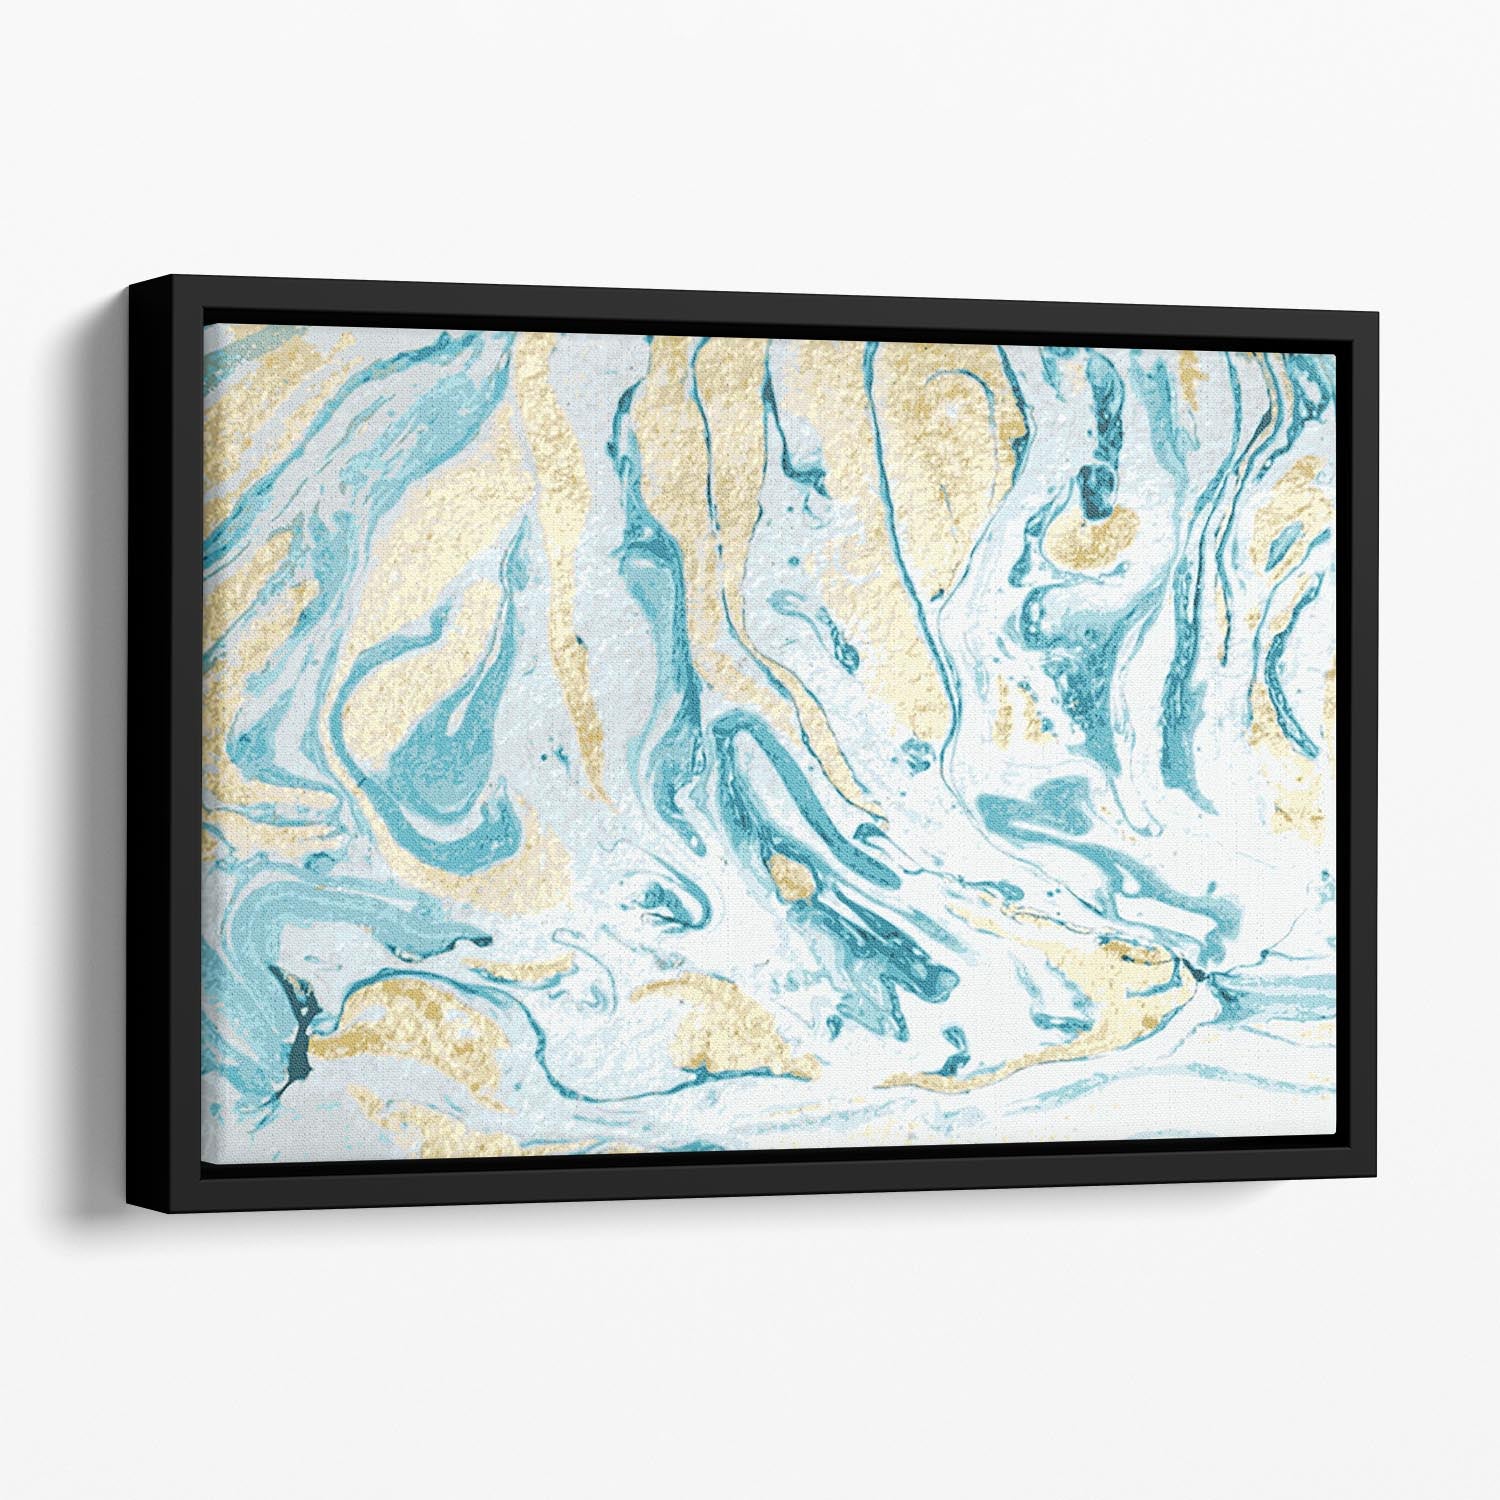 Gold and Teal Swirled Marble Floating Framed Canvas - Canvas Art Rocks - 1